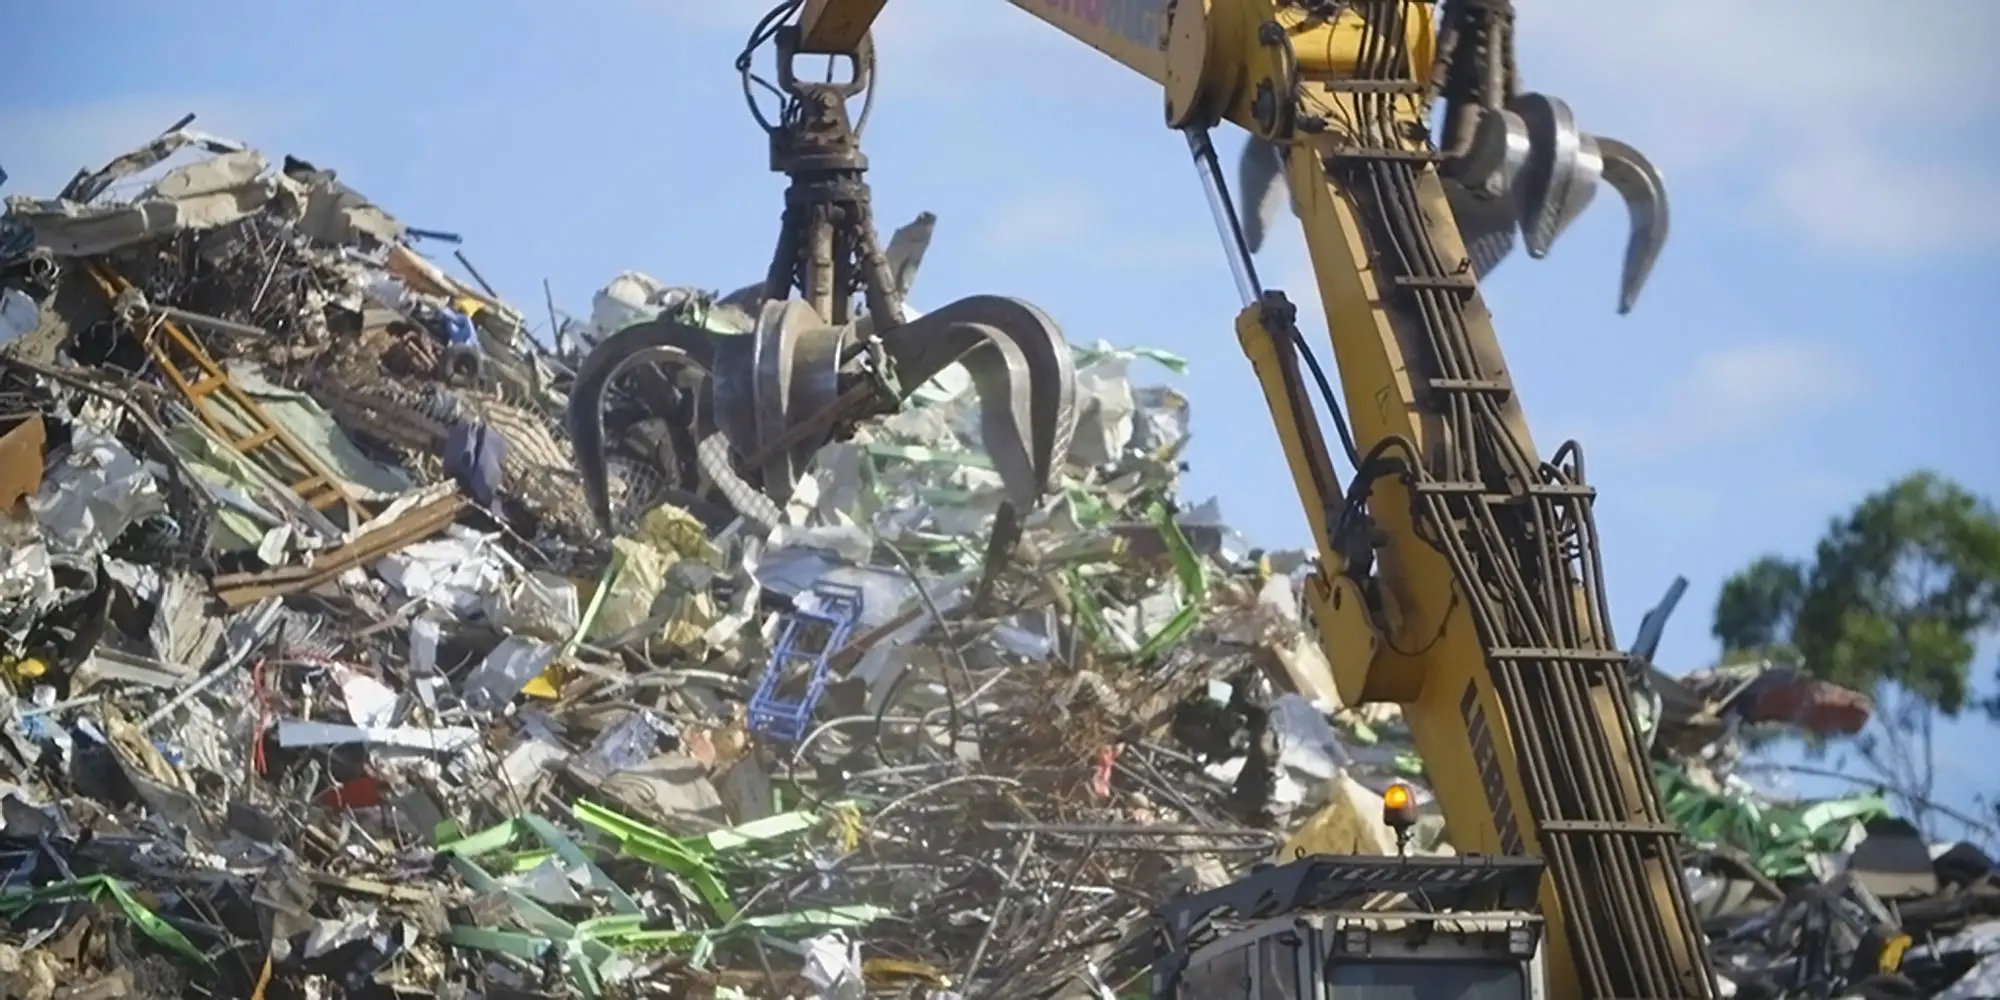 Role of Scrap Metals in Sustainability